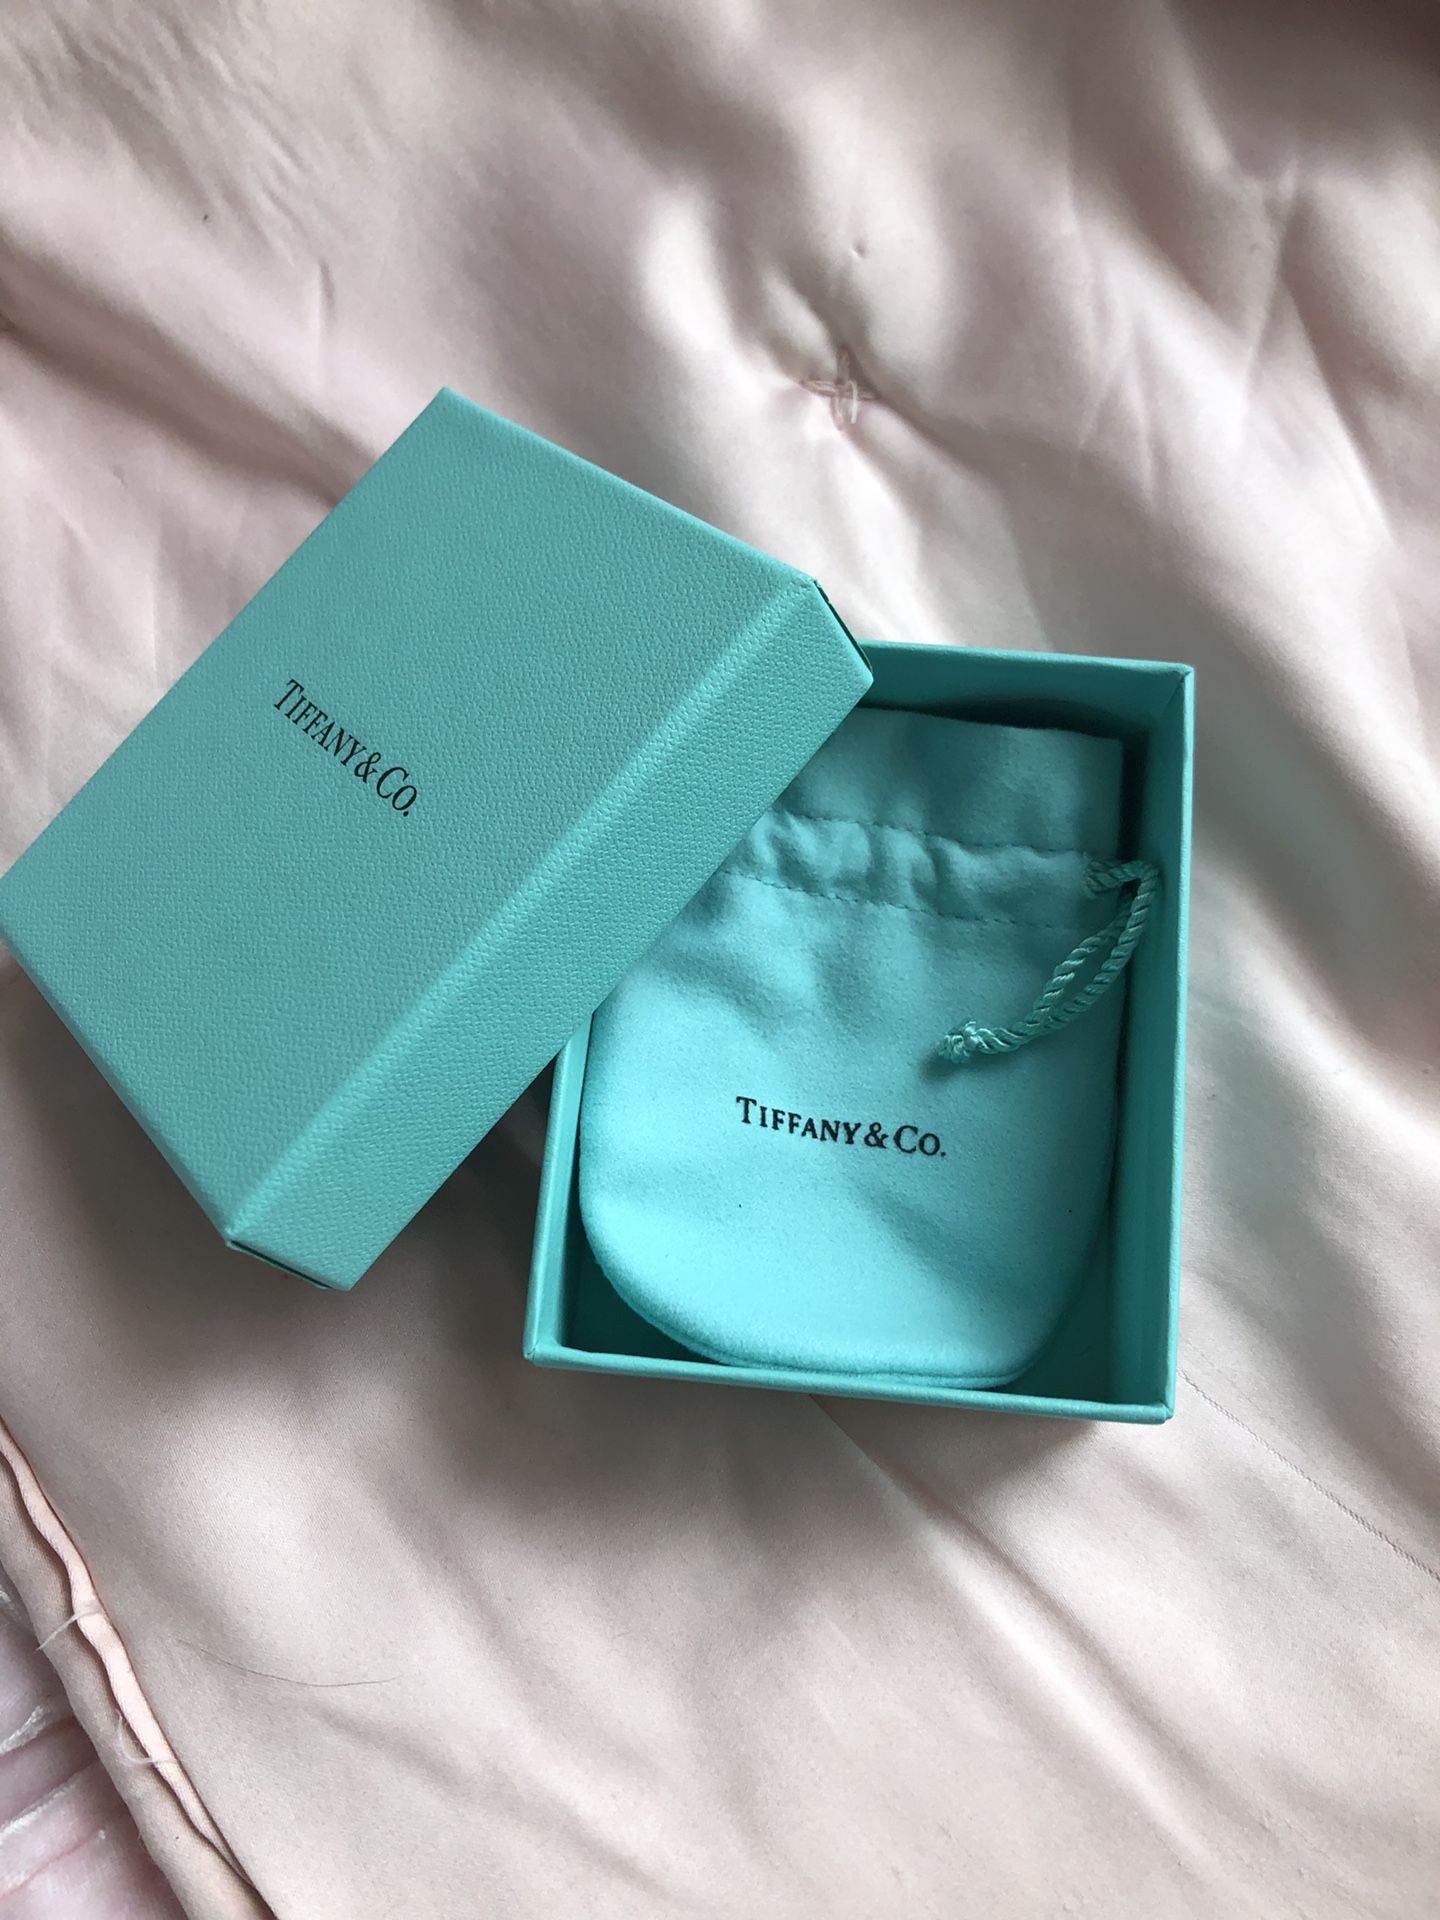 Tiffany box and pouch (empty)